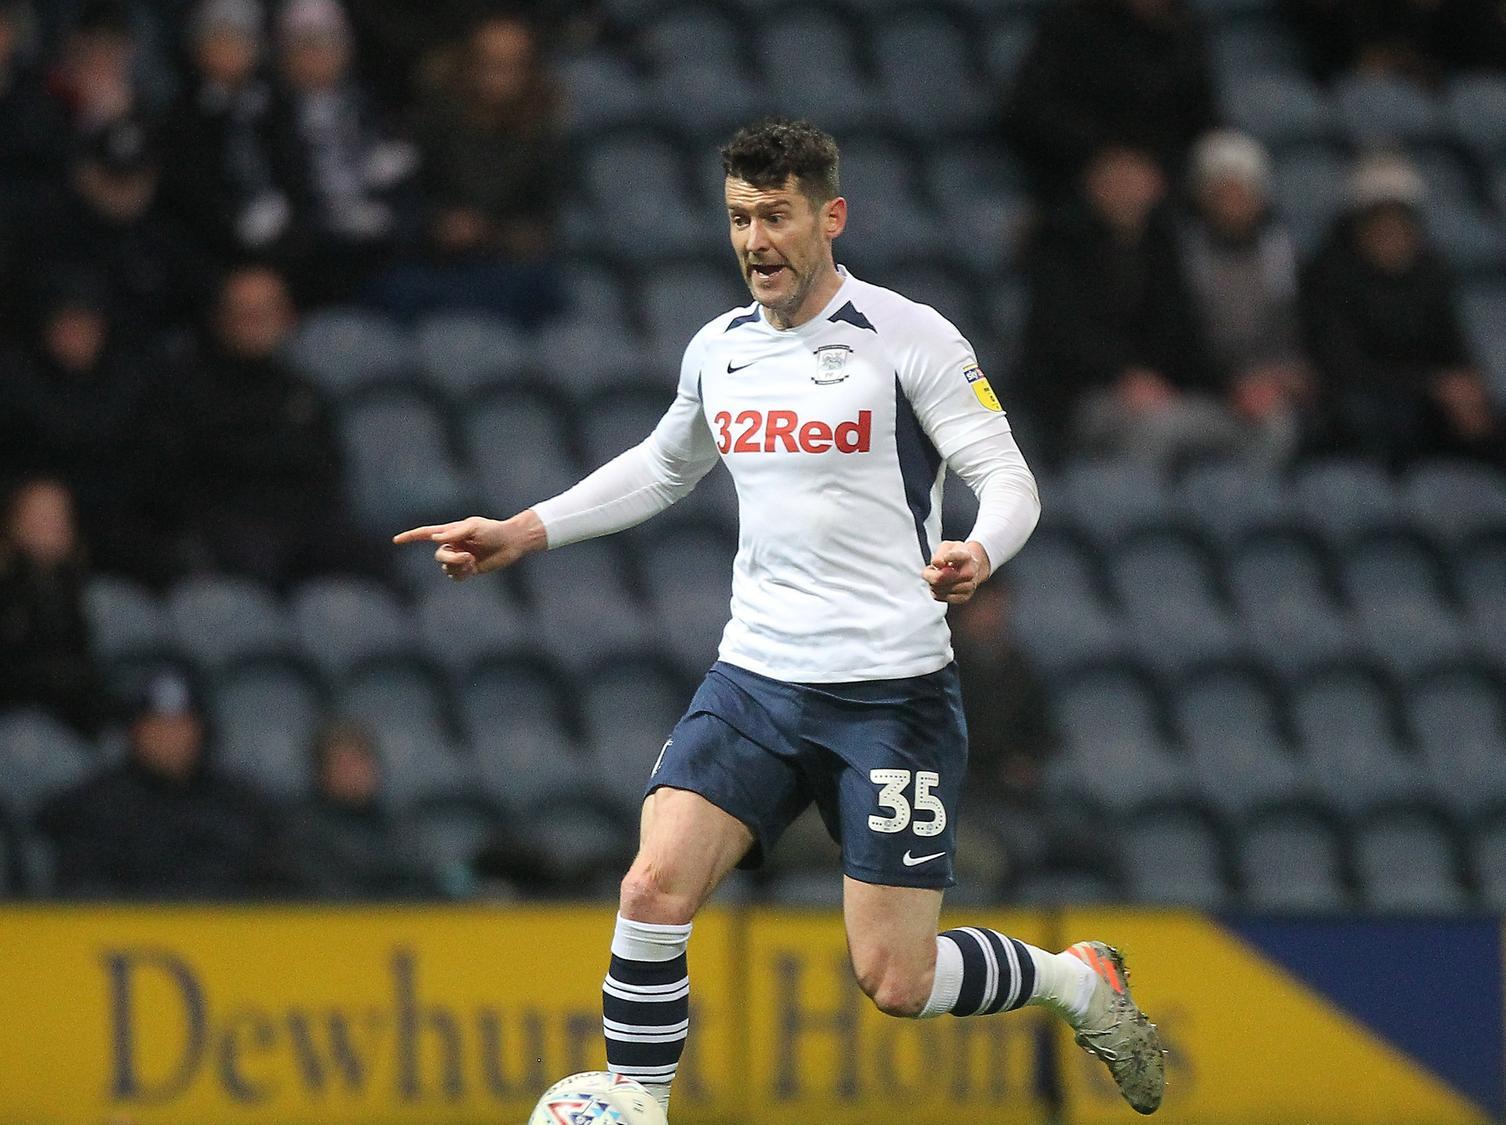 Replaced Harrop in the 65th minute and gave PNE more of a presence up front, taking the ball in and bringing others into the game.